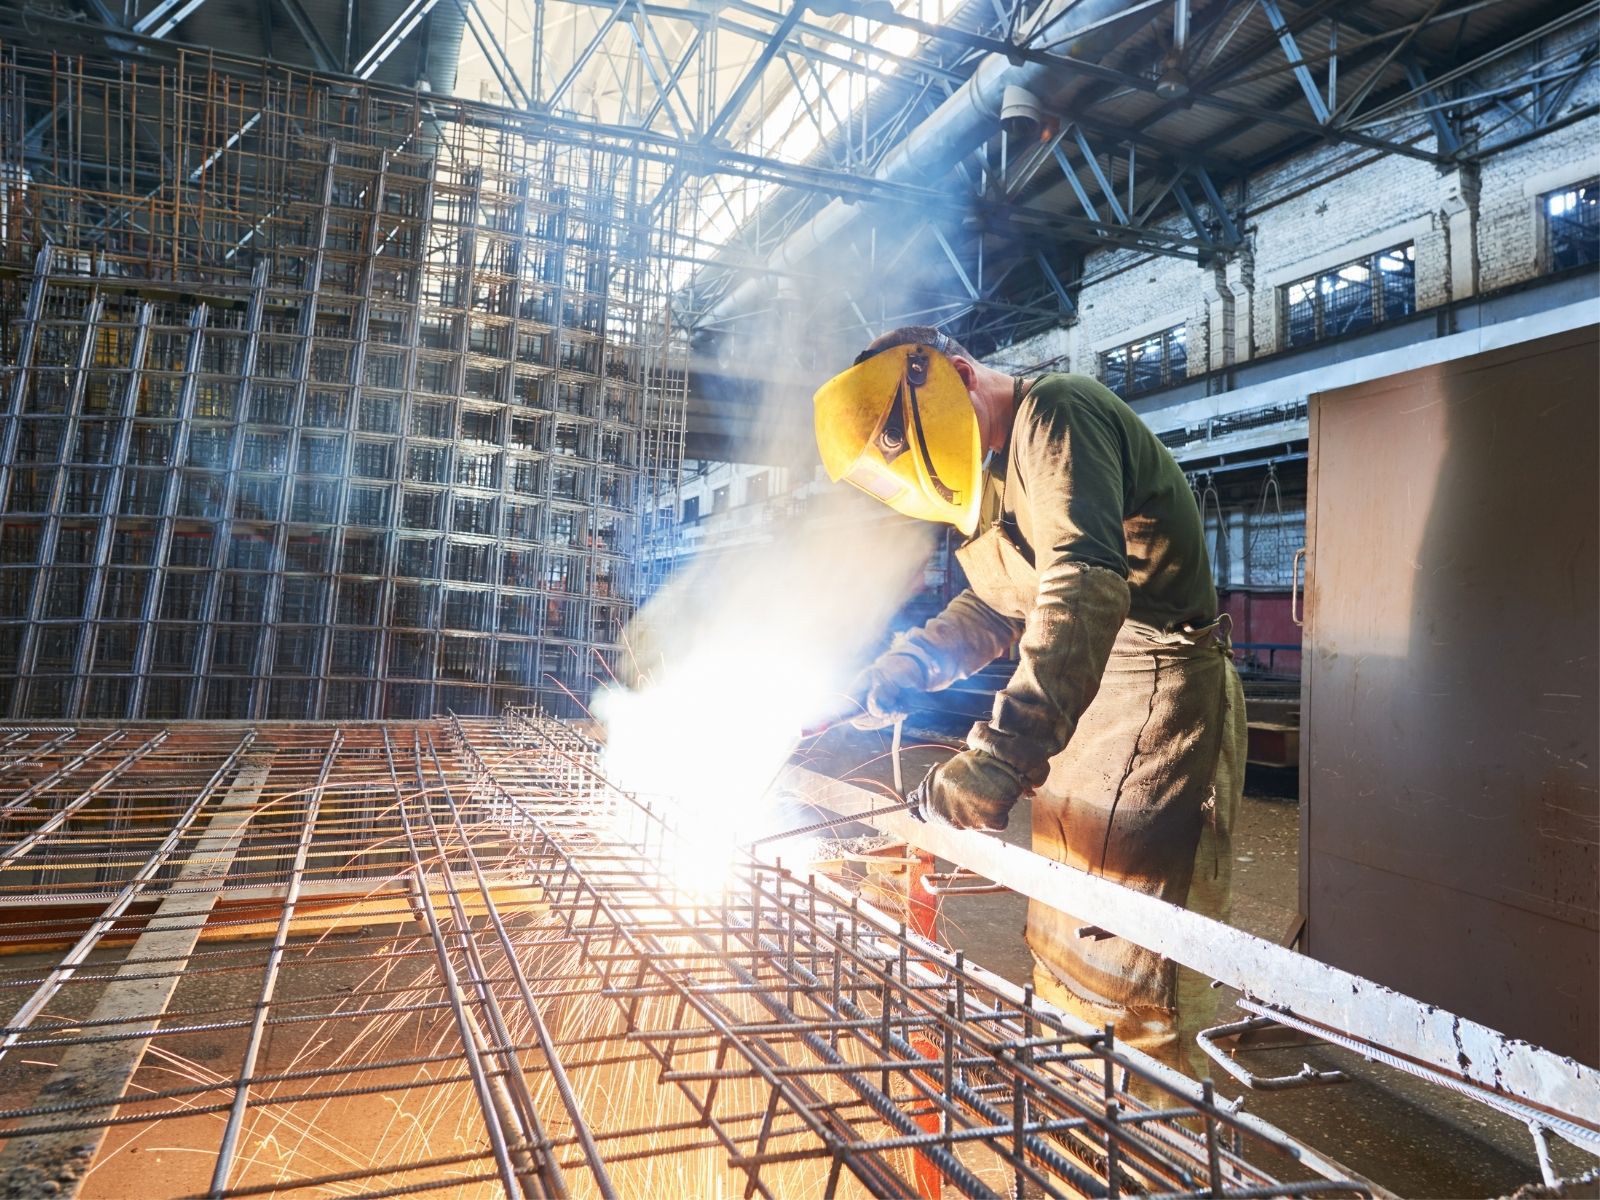 Welder wearing a yellow protective mask and using a heat tool to create a metal grid in a warehouse setting.